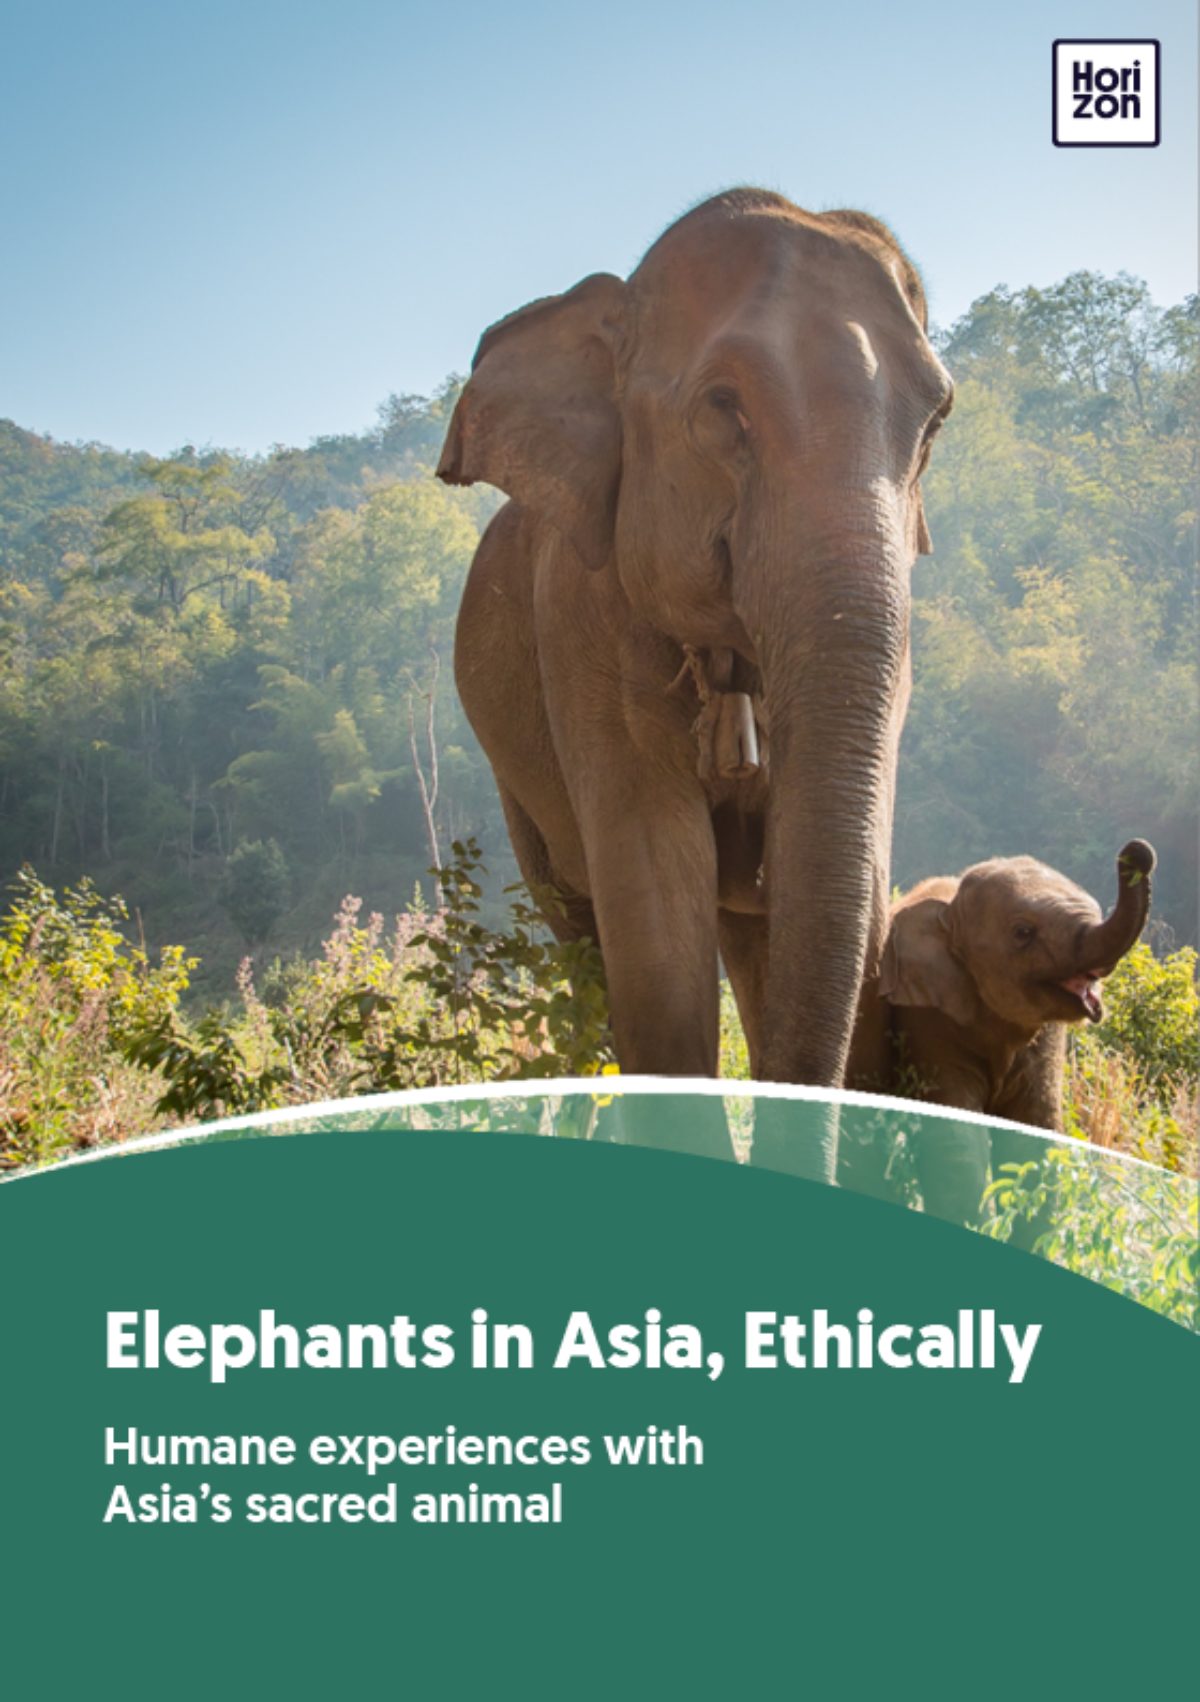 Elephants in Asia, Ethically